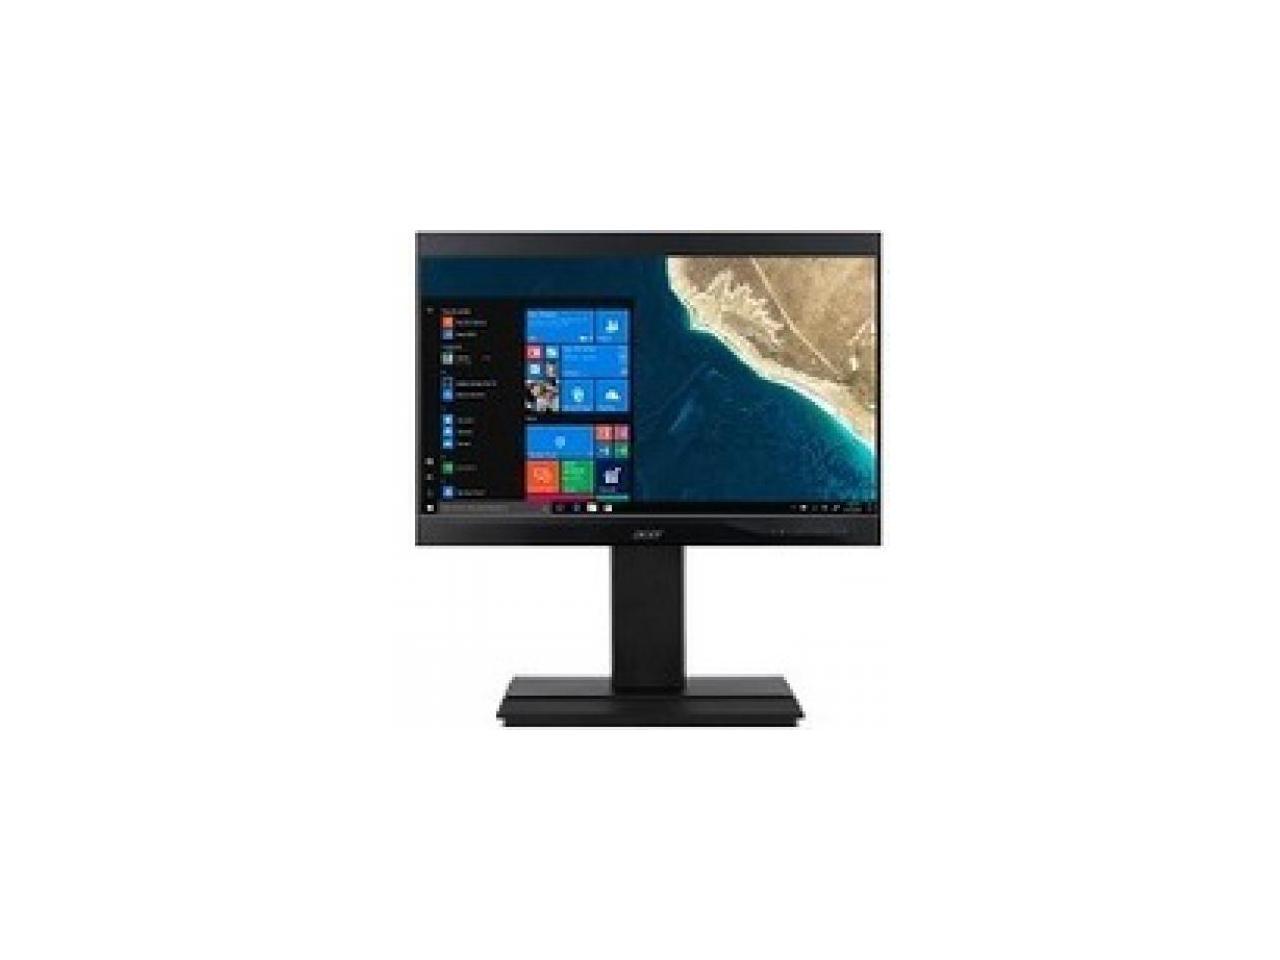 Acer Veriton Z4860G DQ.VRZAA.003 All-in-One Computer - Intel Core i7 (8th Gen) i7-8700 3.20 GHz - 8 GB DDR4 SDRAM - 1 TB HDD - 23.8" FHD Non-Touch Display - Windows 10 Pro 64-bit